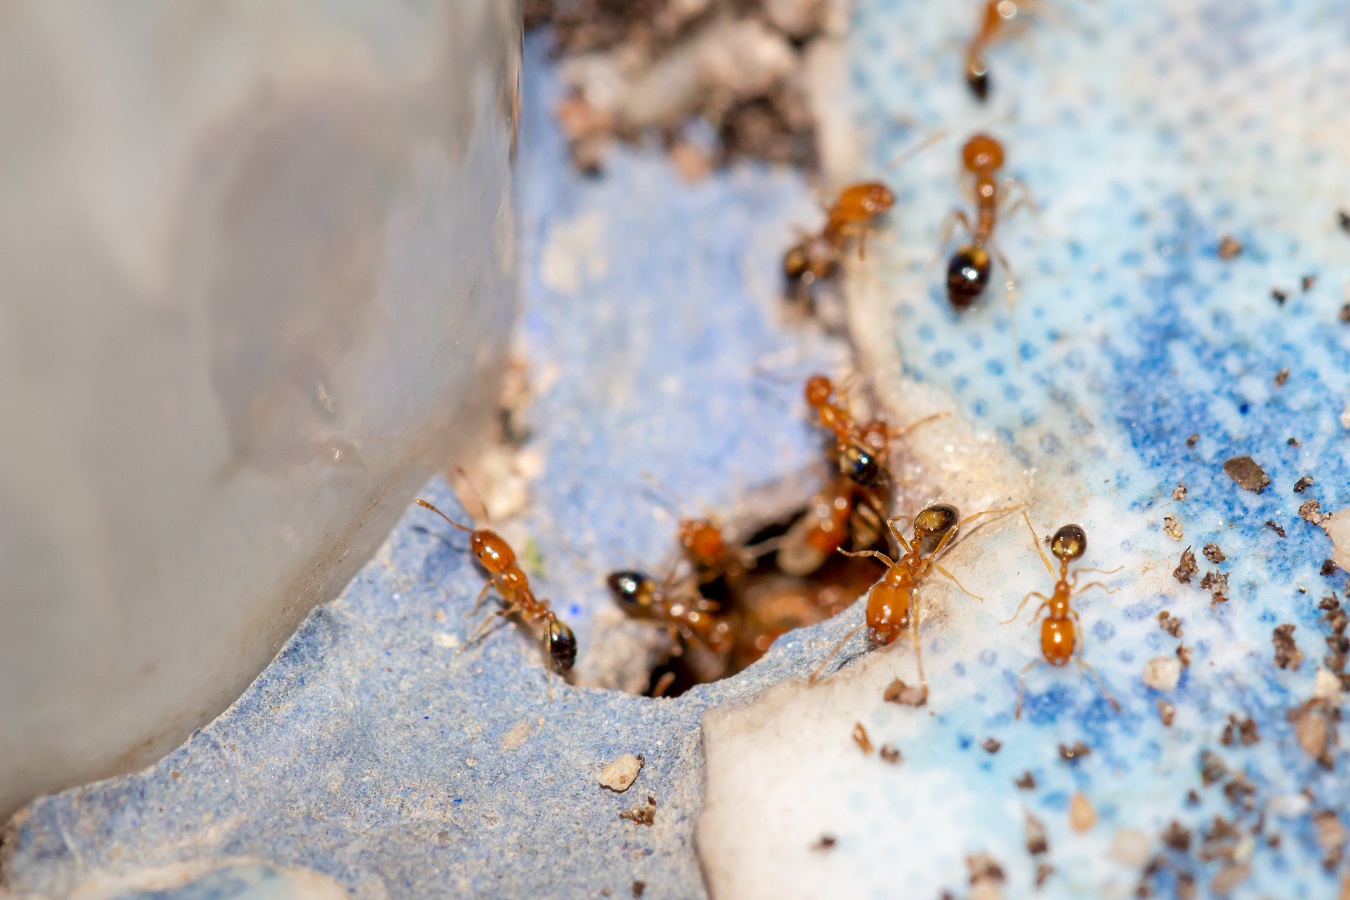 9 Fascinating Facts About Termites